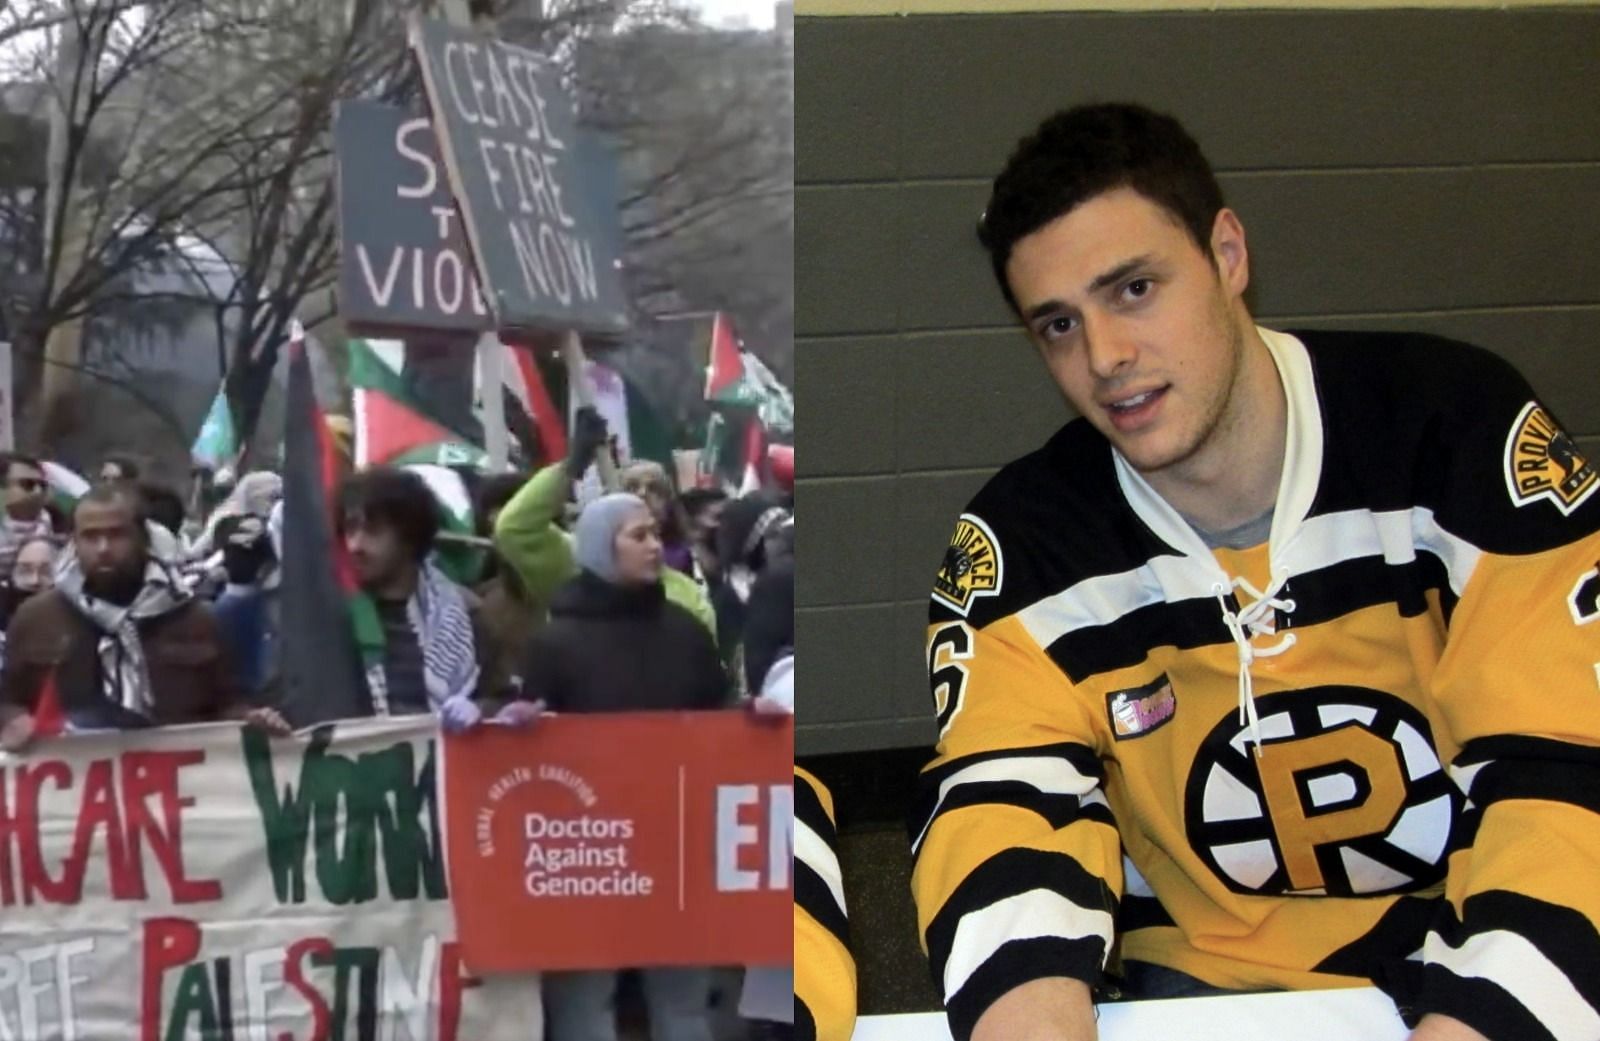 Ex-NHL player goes scorched earth on pro-Palestinian supporters for chanting outside cancer center in New York City